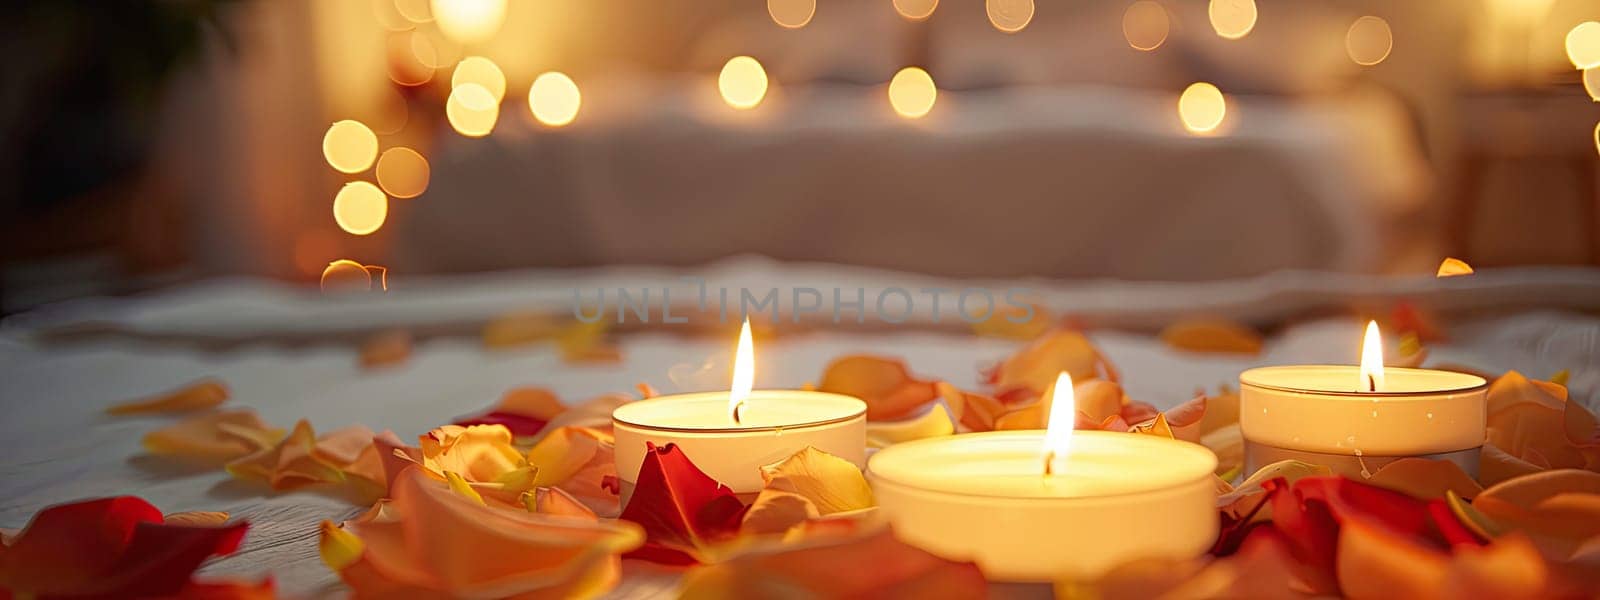 Bed of candles and rose petals. Selective focus. by yanadjana